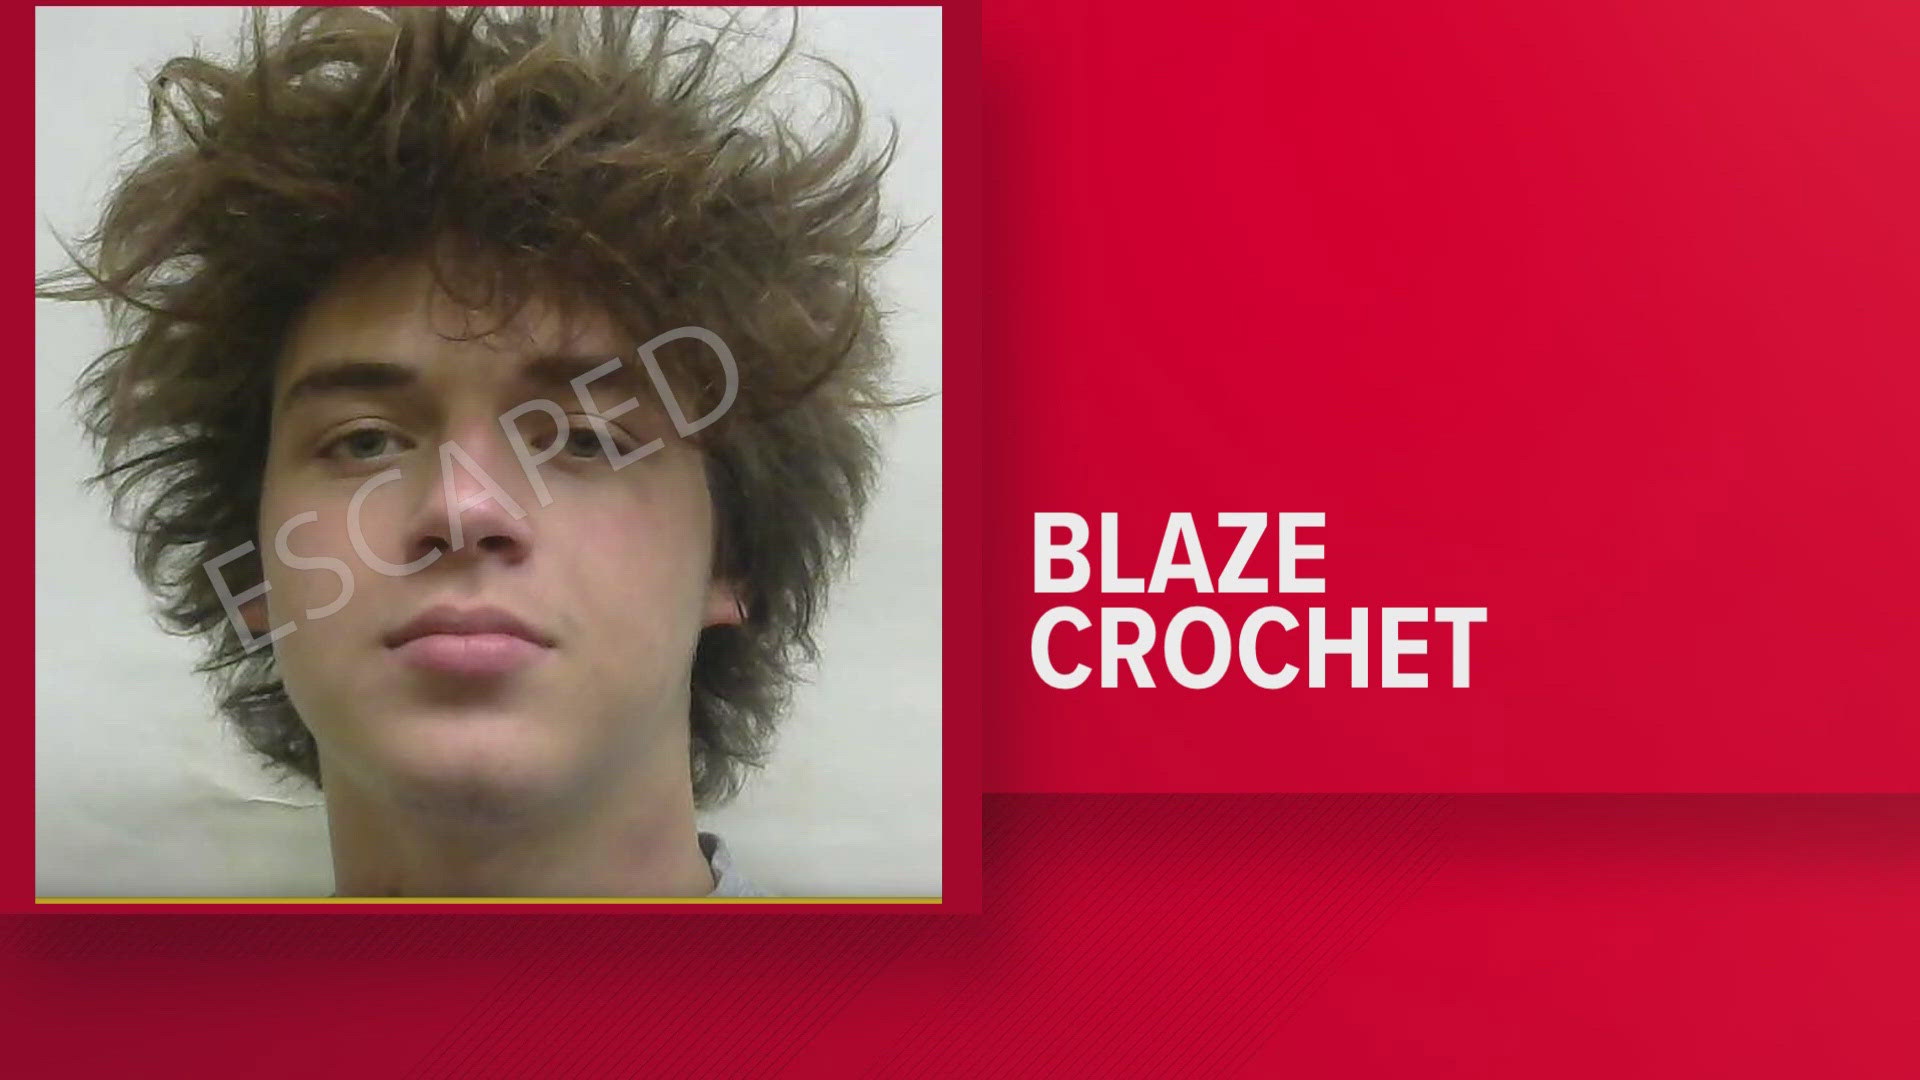 Blaze Crochet, 17, of Thibodaux, was located by authorities after he escaped from an Office of Juvenile Justice facility.